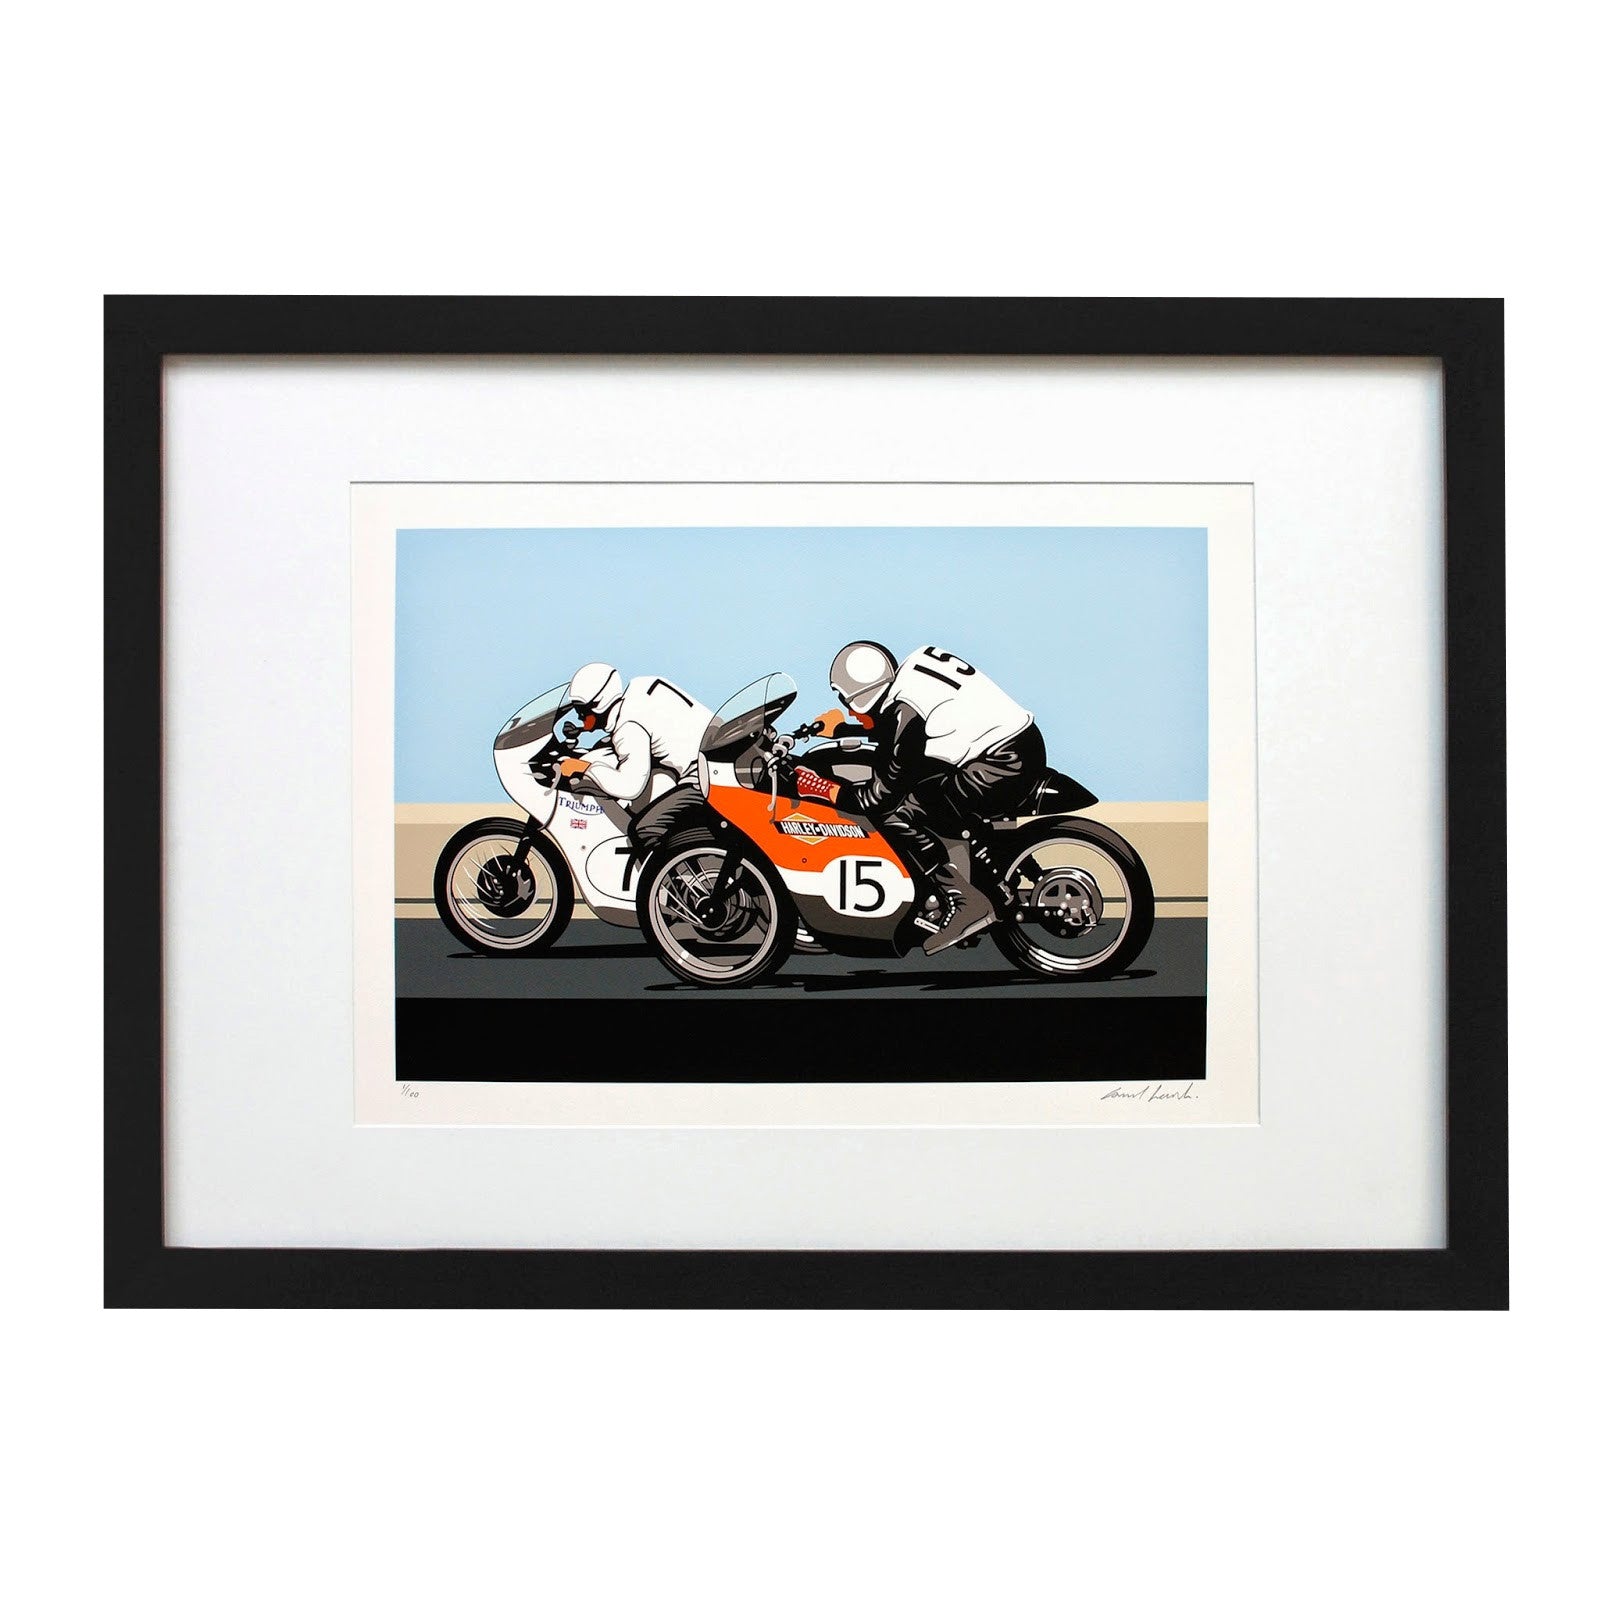 Gloves Off Limited Edition Print - Heroes Motorcycles